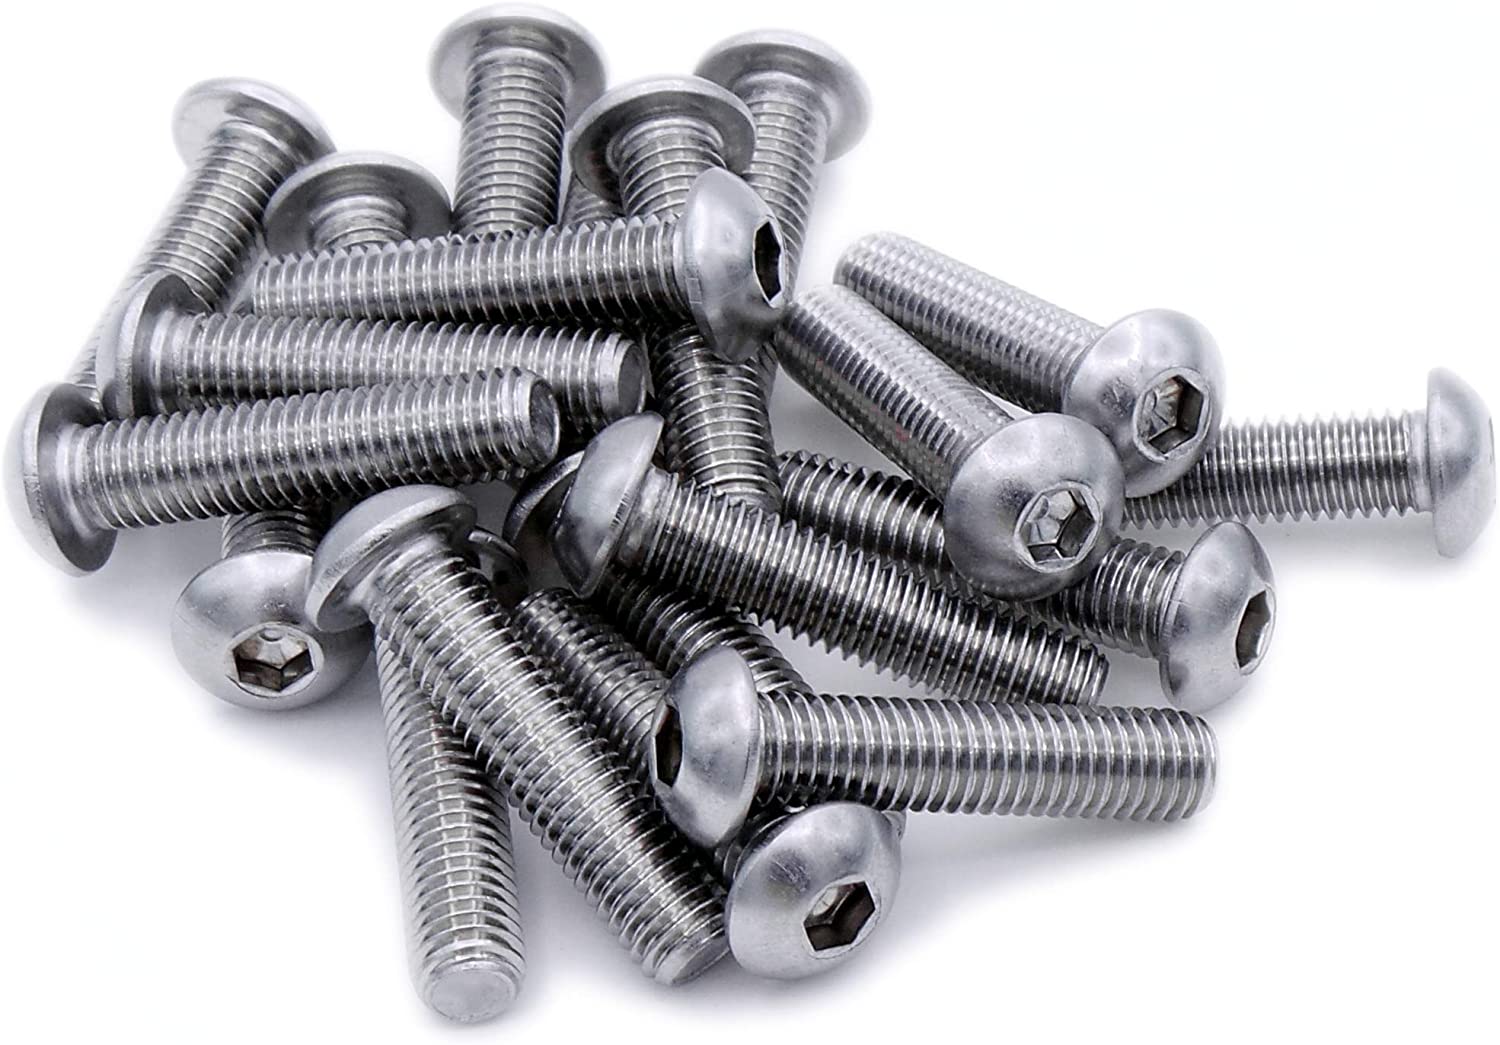 Do You Know What Types of Nuts and Bolts Are Suitable as Marine Fasteners?